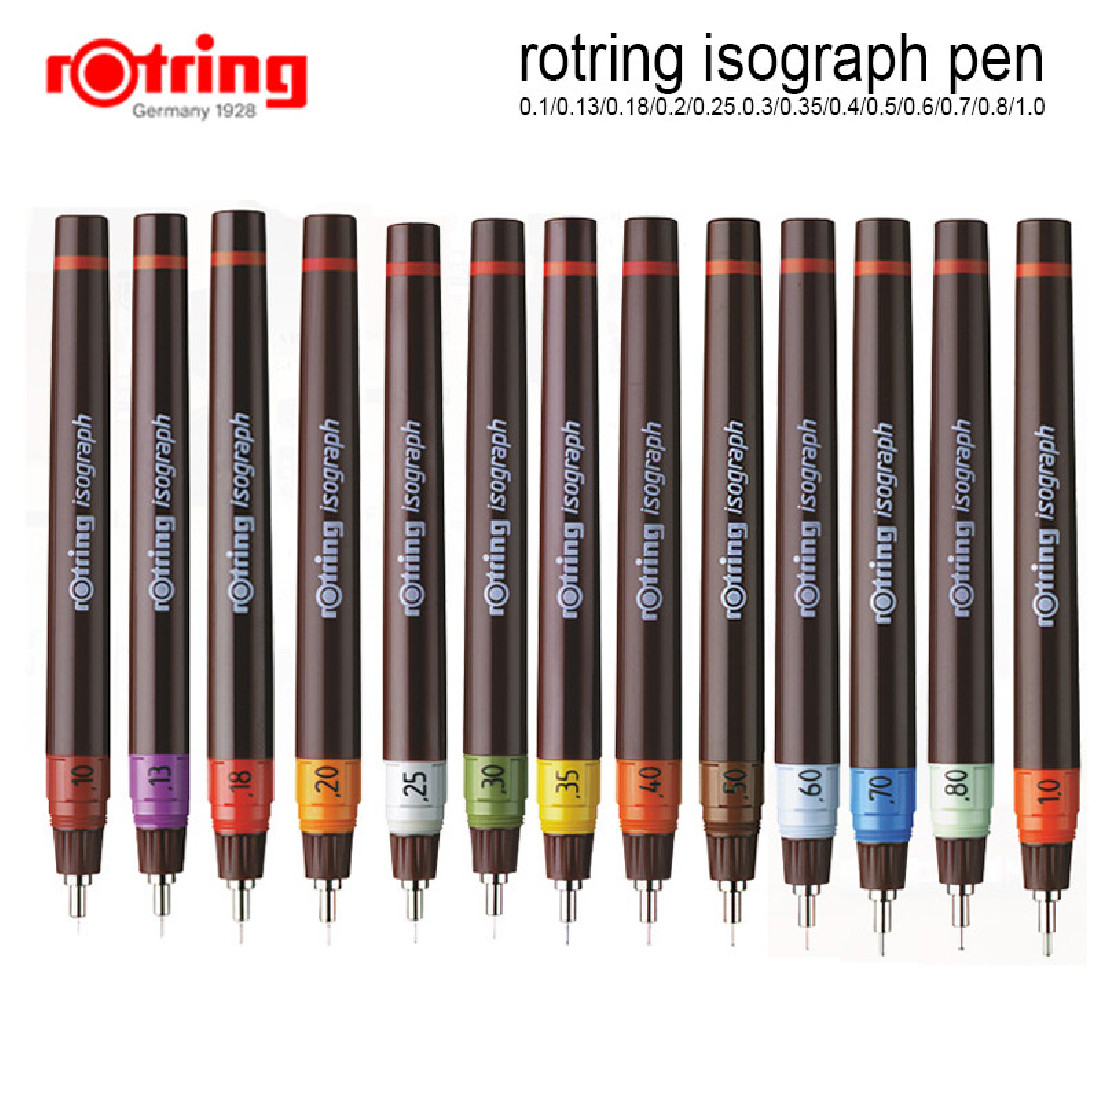 Rotring Isograph pen 0,2mm